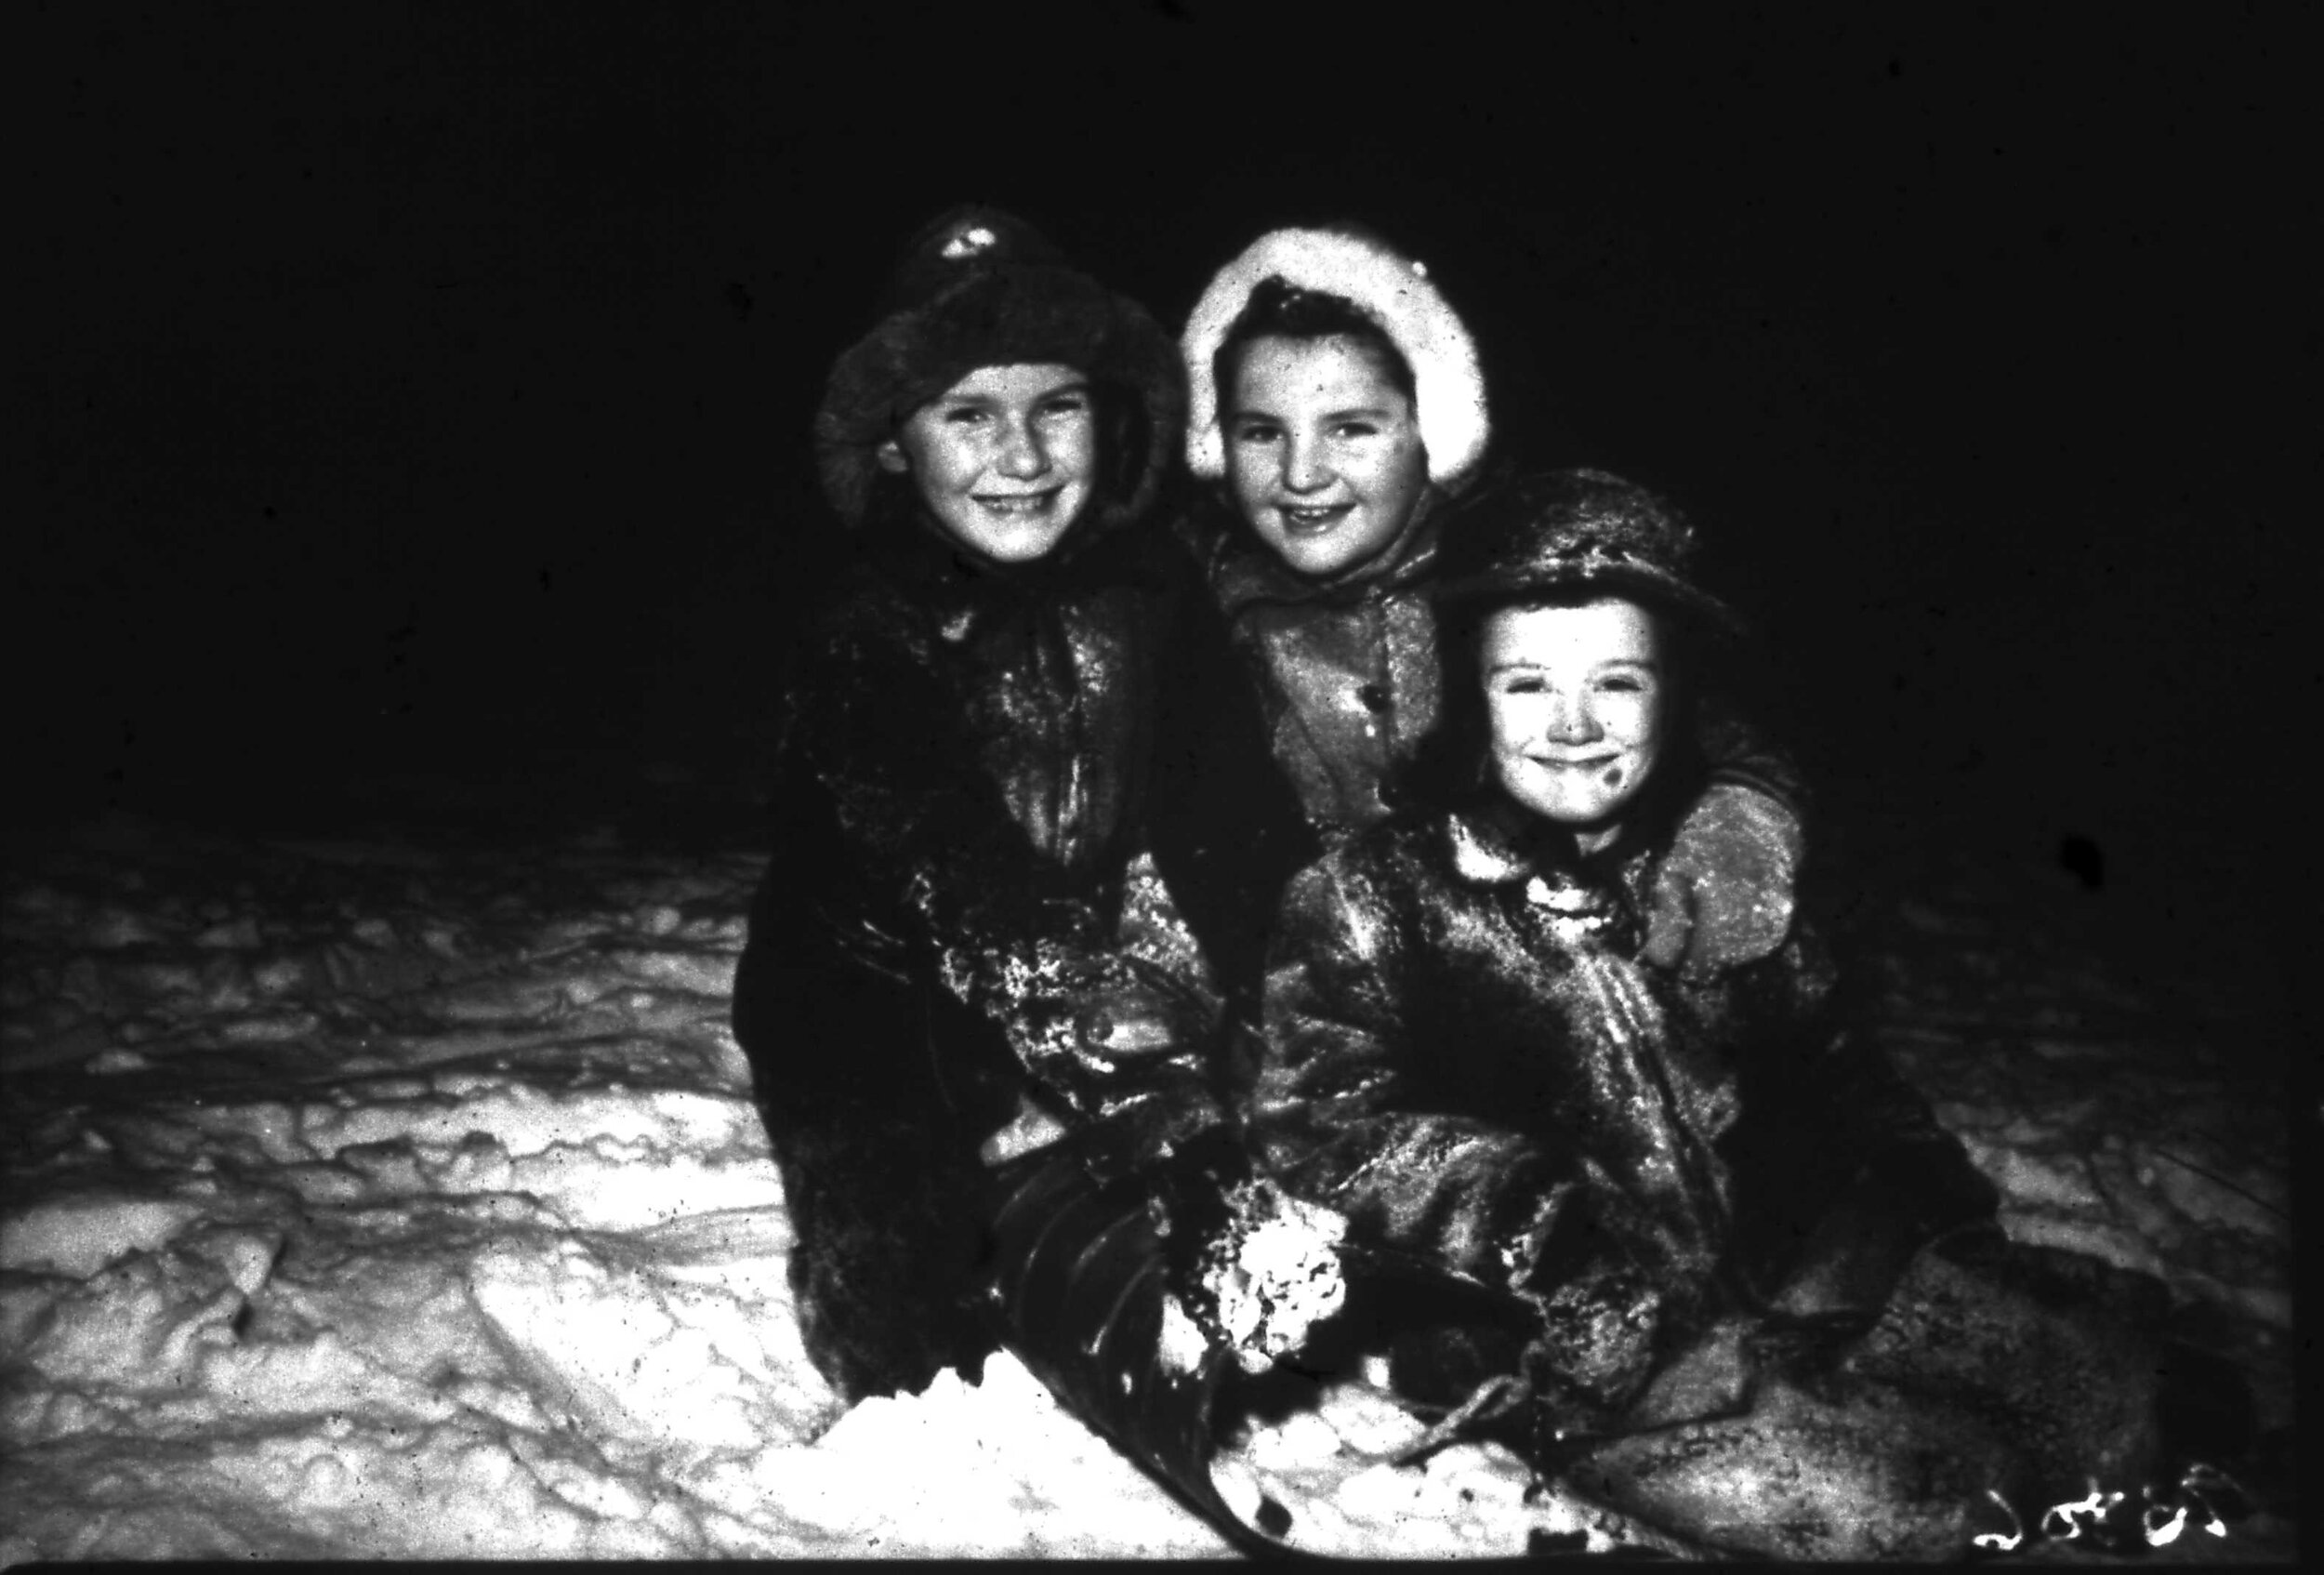 Children playing in the snow - 1940s (Copy)